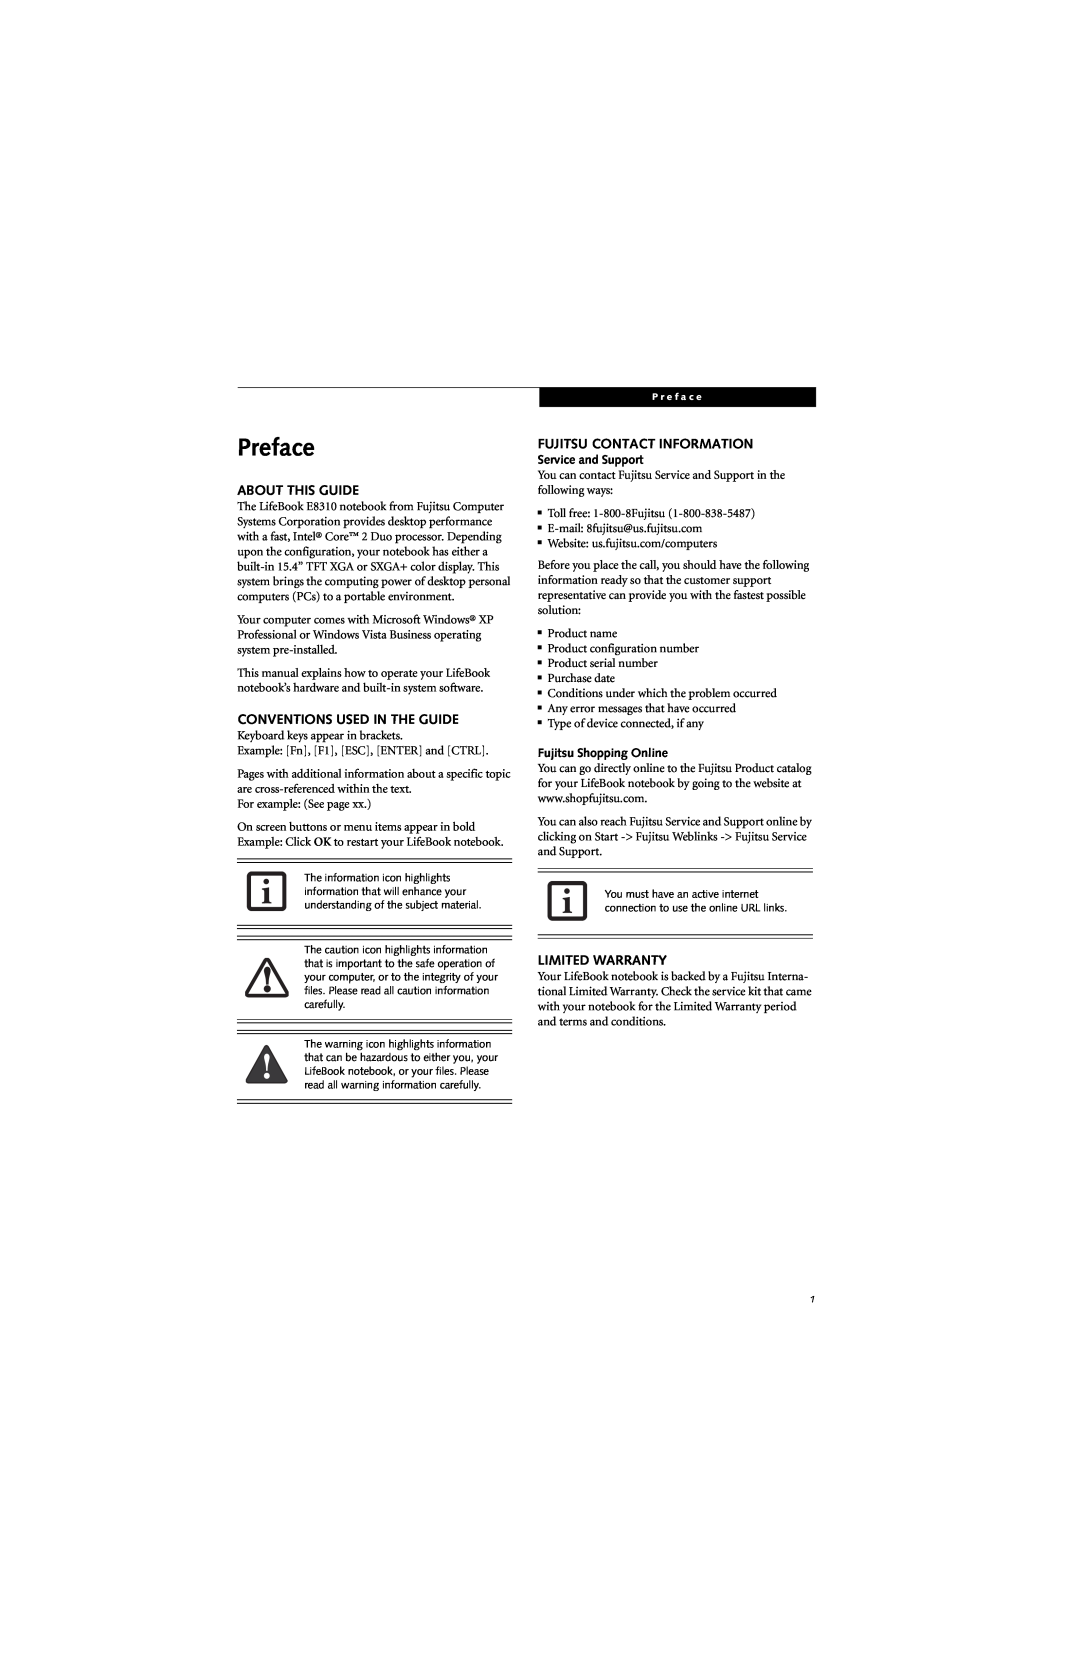 Fujitsu E8310 Preface, About This Guide, Conventions Used In The Guide, Fujitsu Contact Information, Limited Warranty 